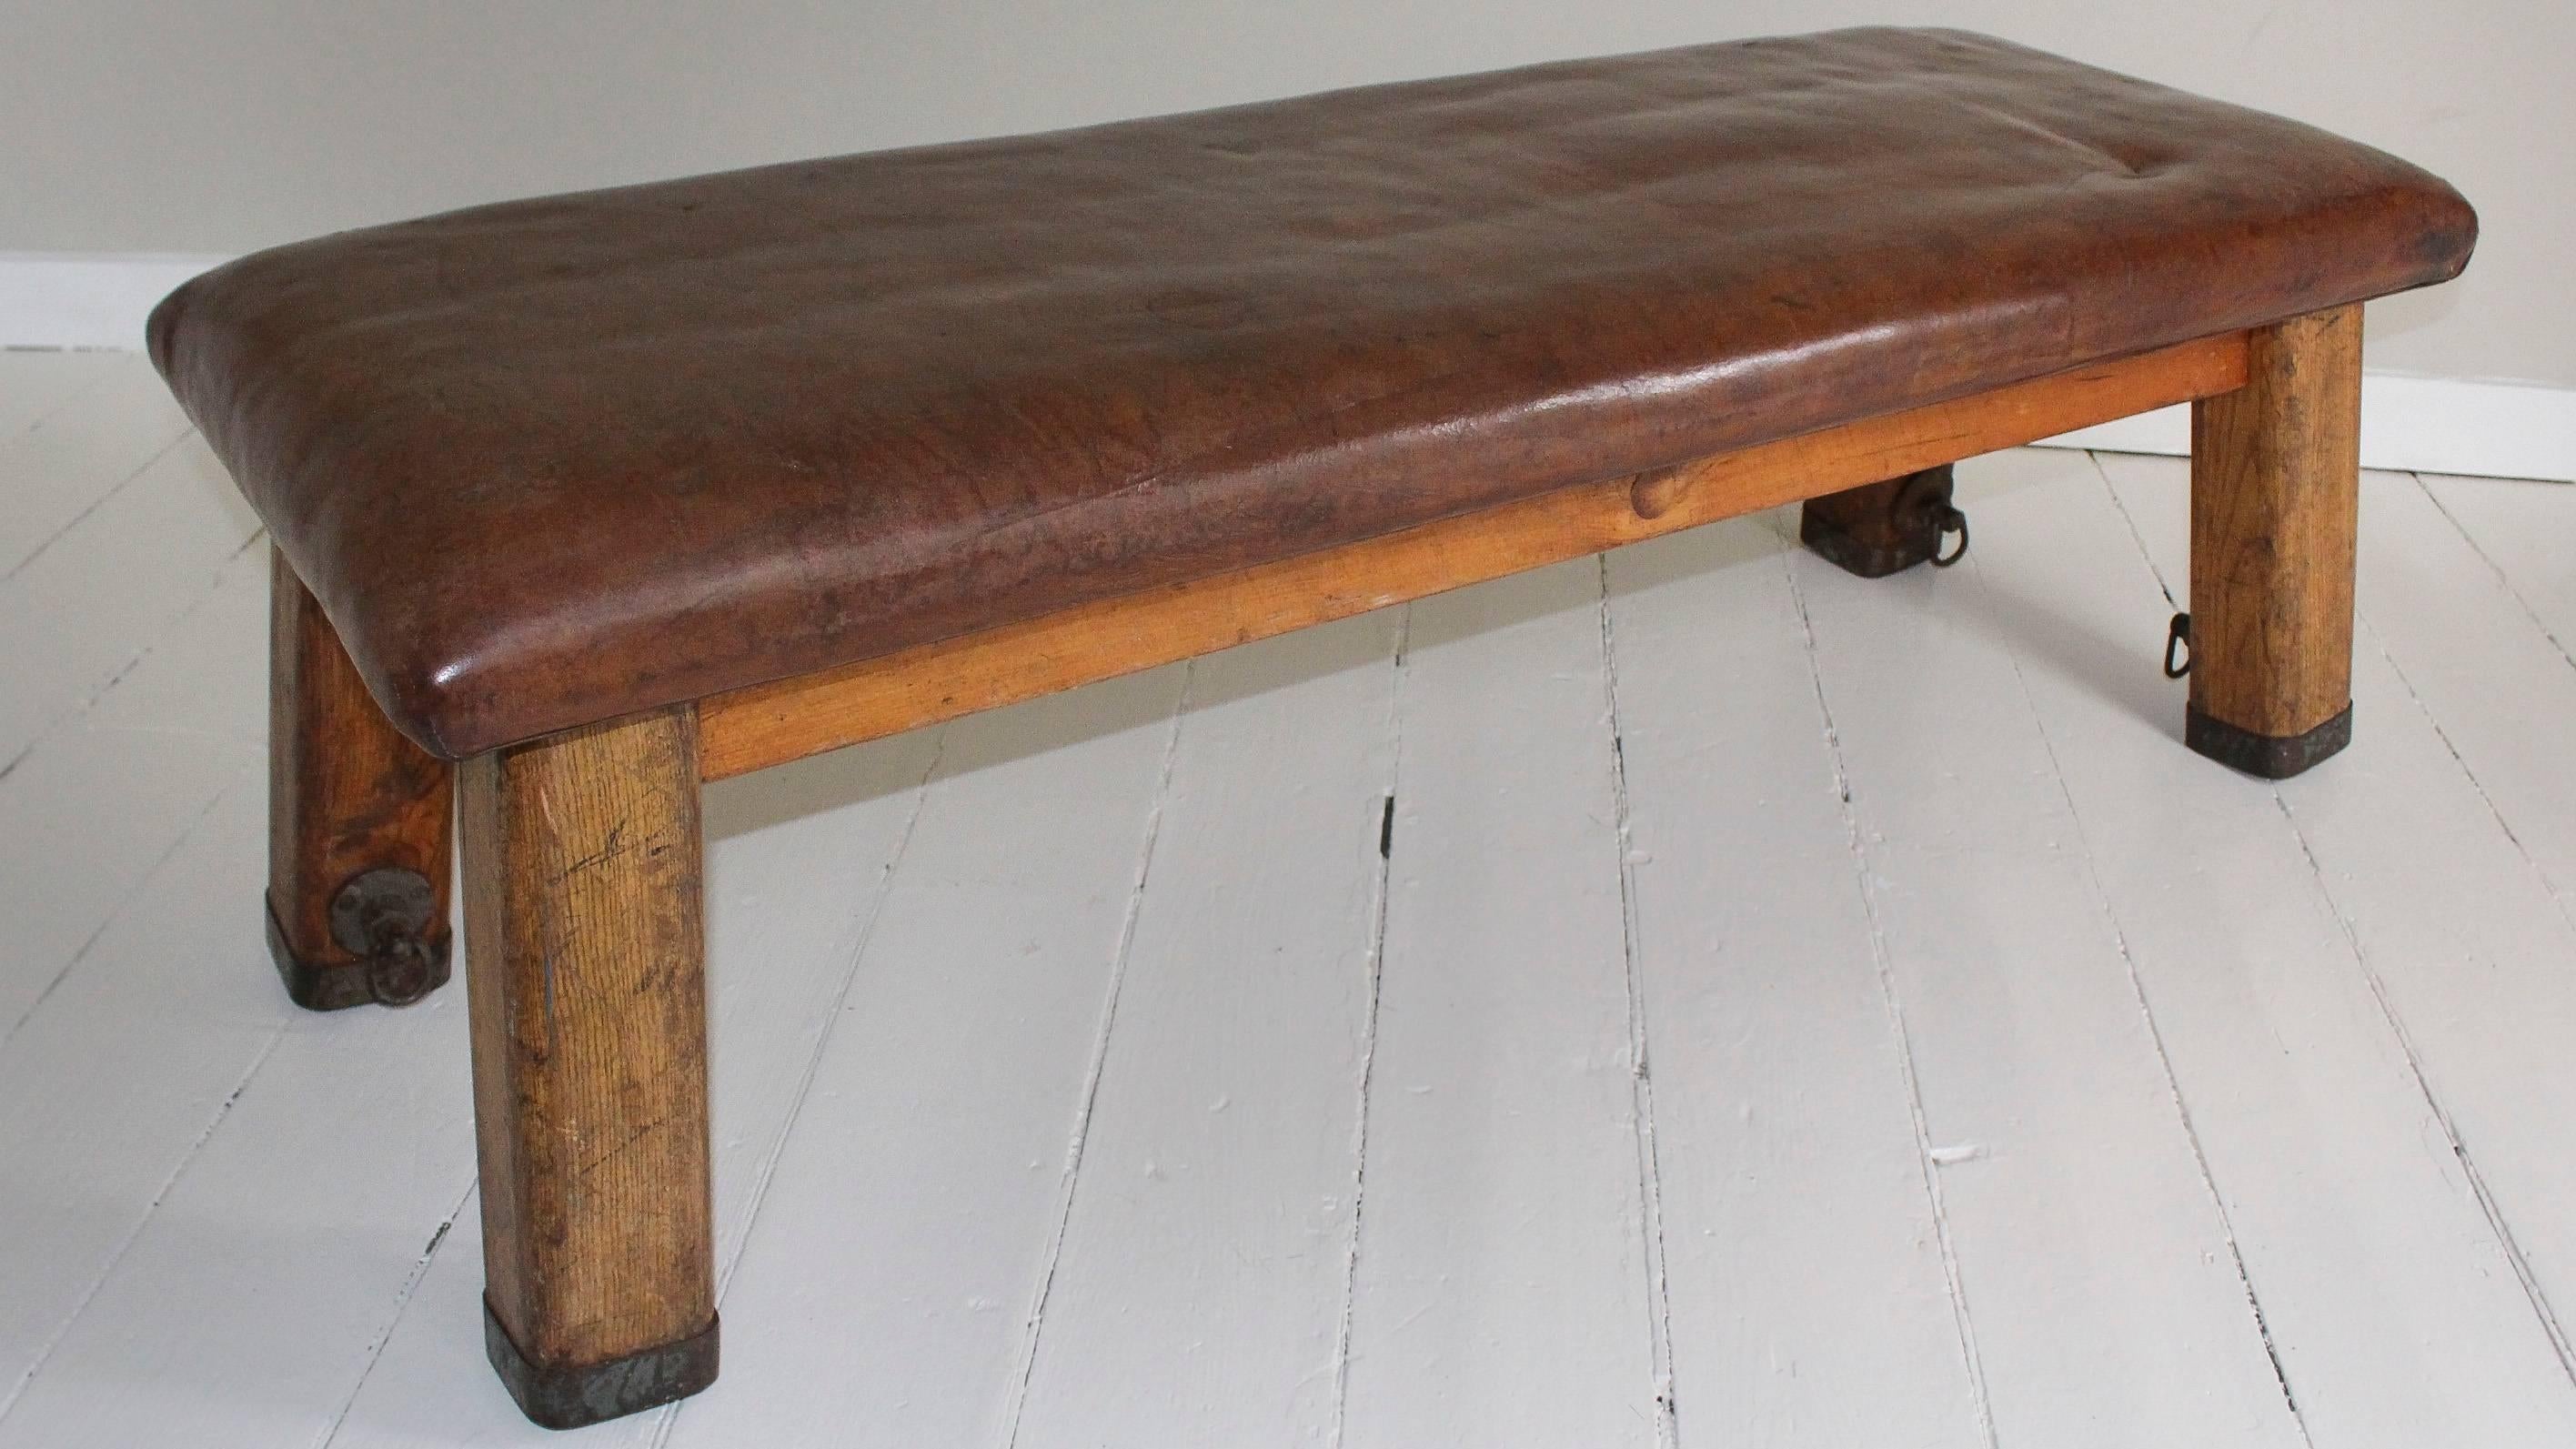 Leather gym bench, 1940s France, with iron surround at base of legs and iron rings bolted to the inside of the legs for securing to the floor.